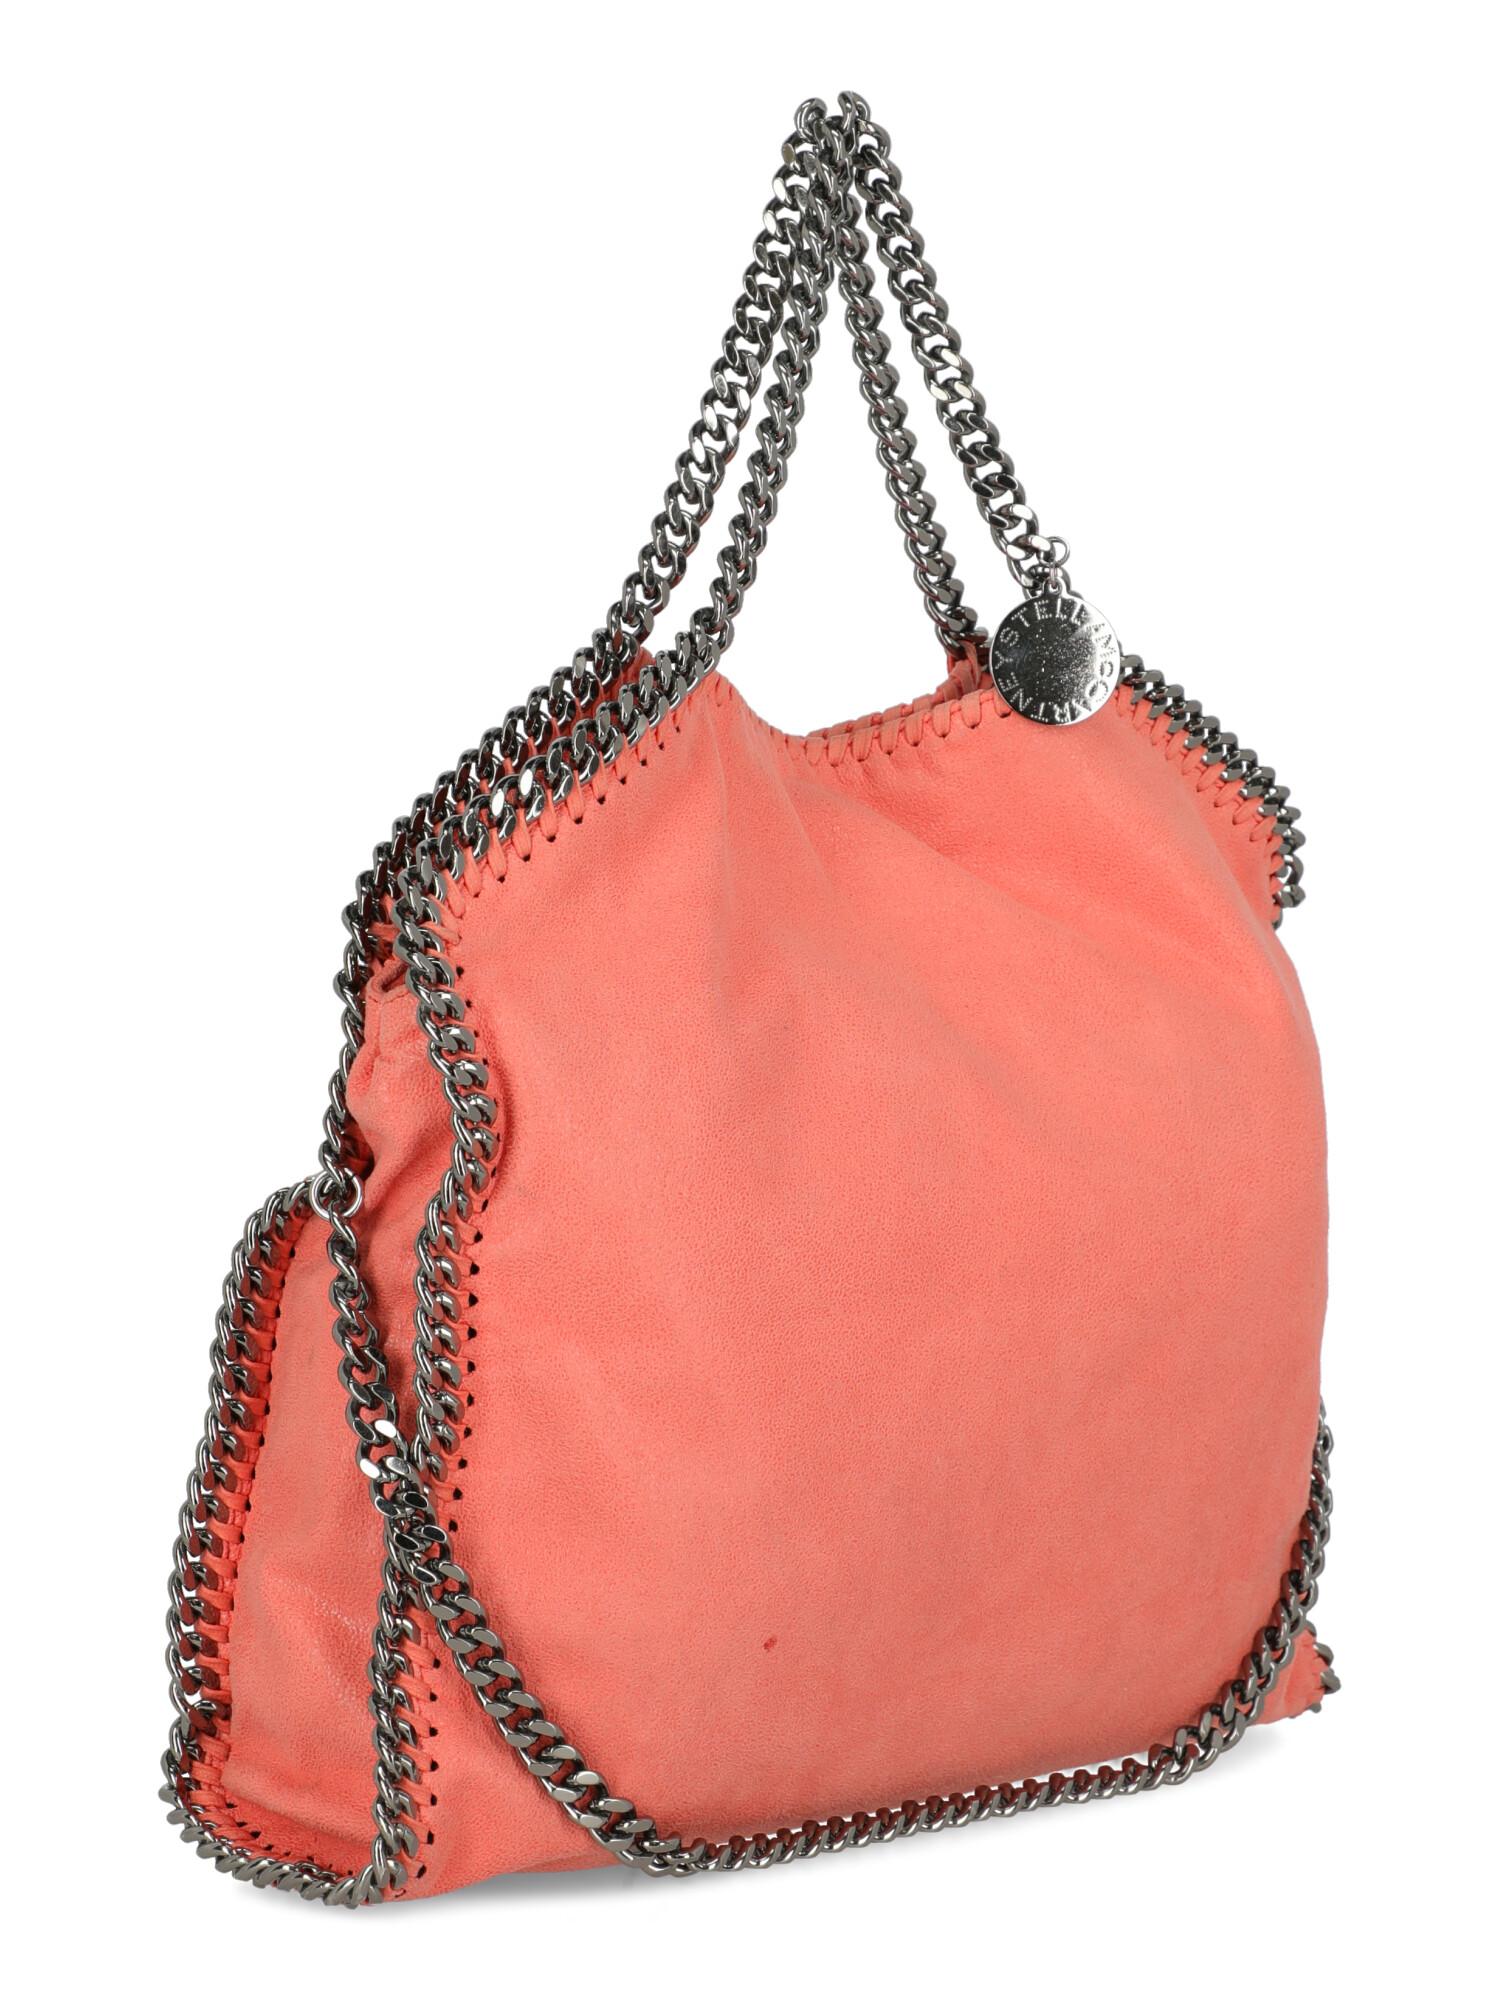 Stella Mccartney  Women   Shoulder bags  Falabella Orange Faux Leather  In Good Condition For Sale In Milan, IT